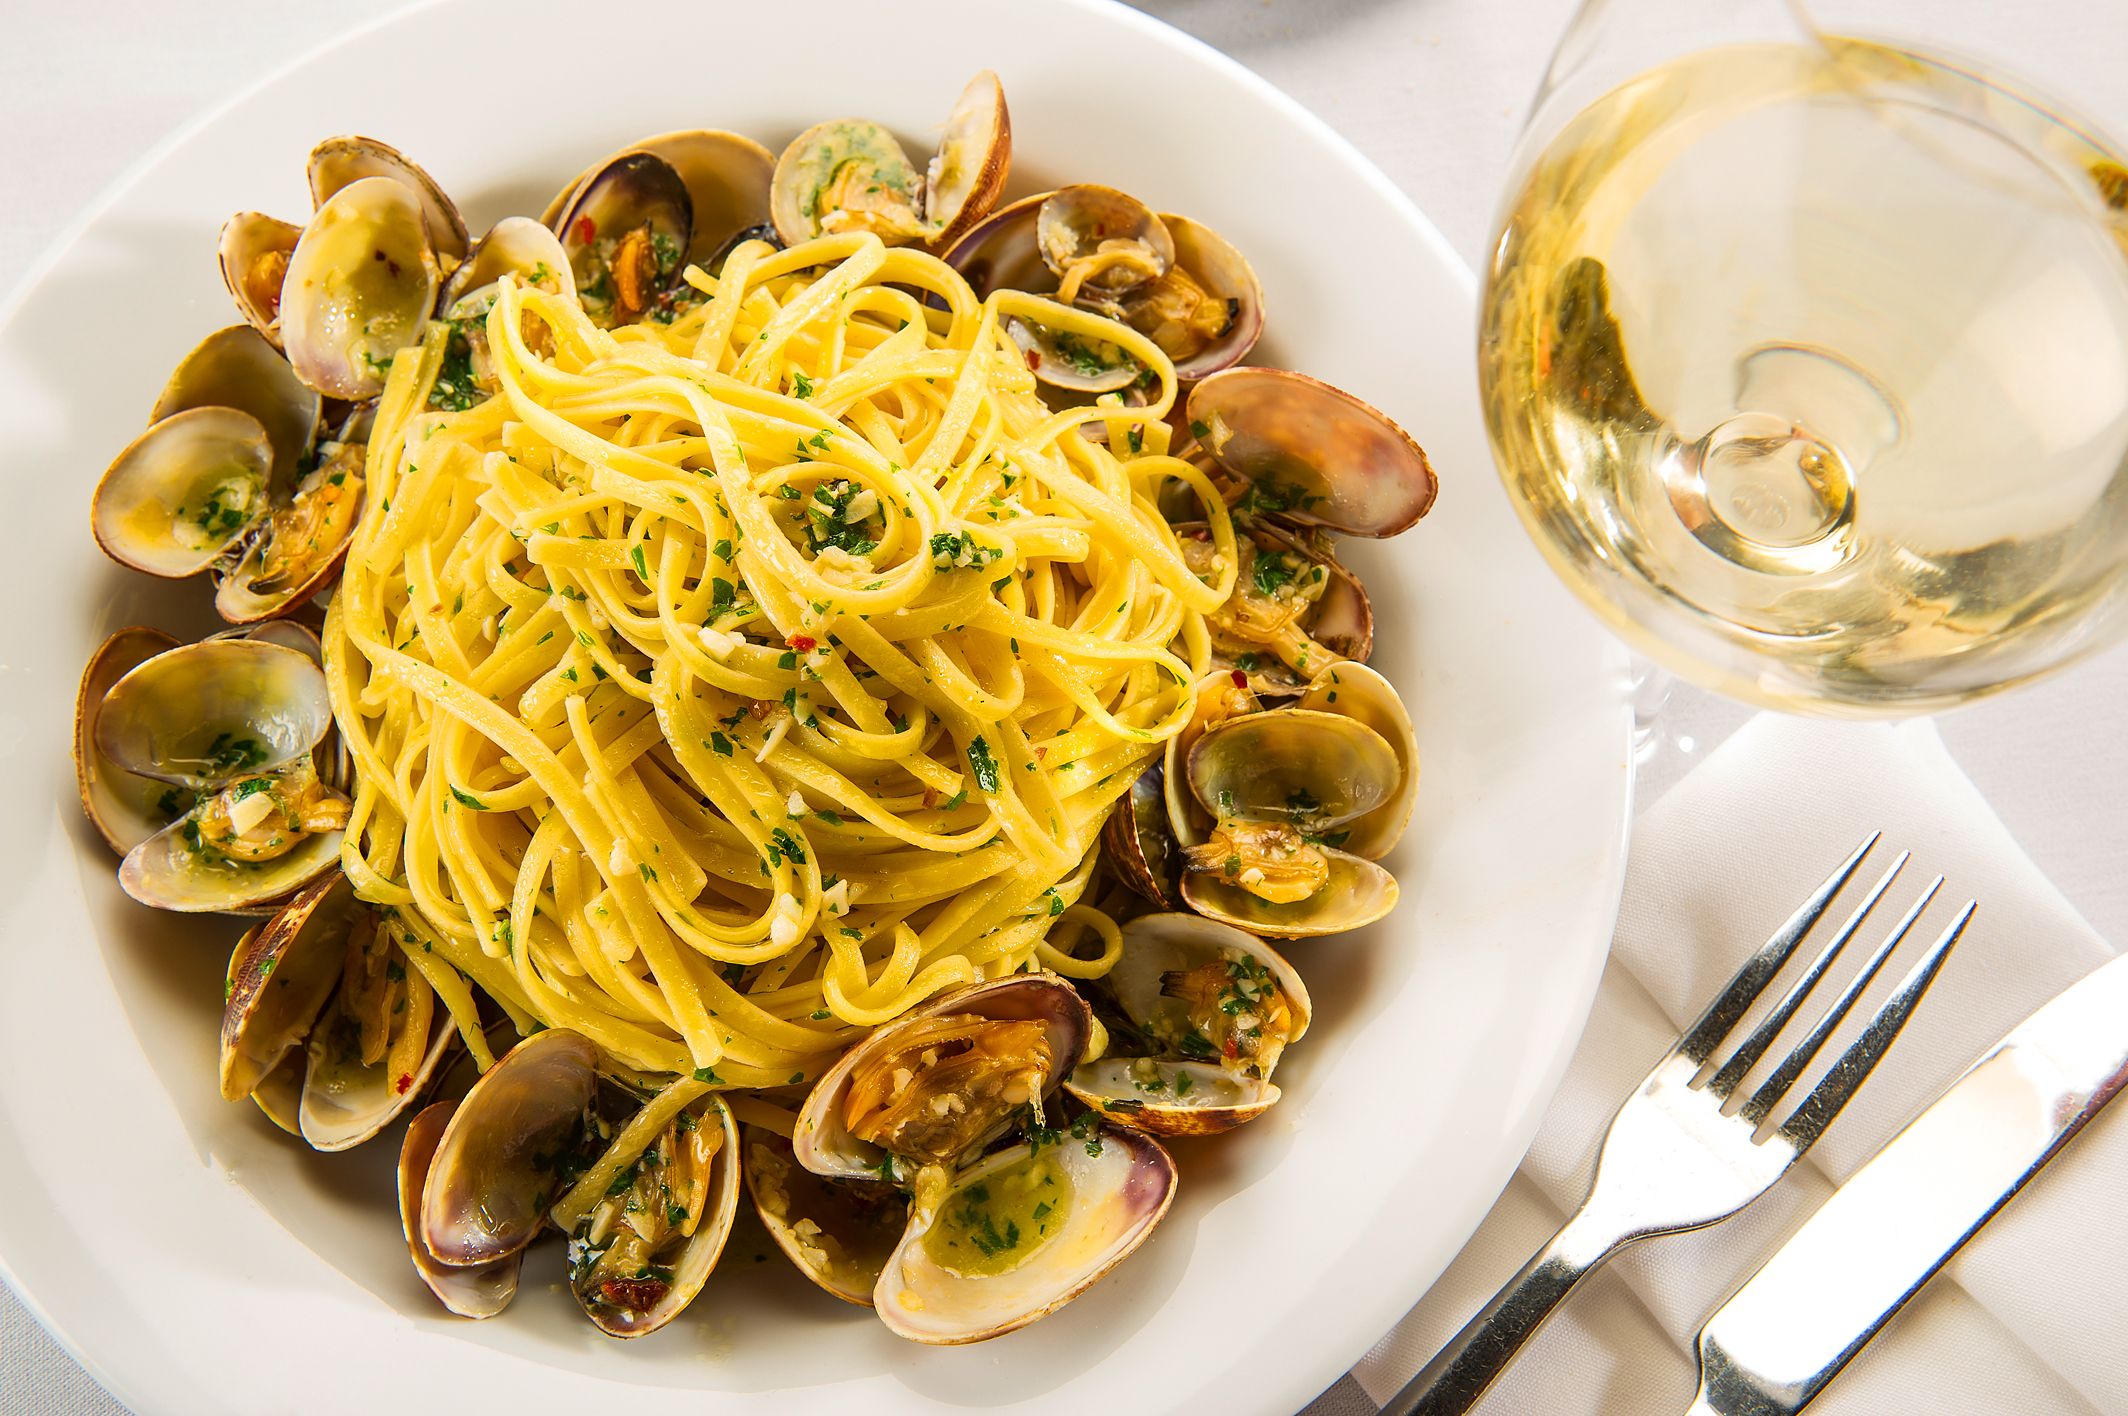 Pasta and Clams